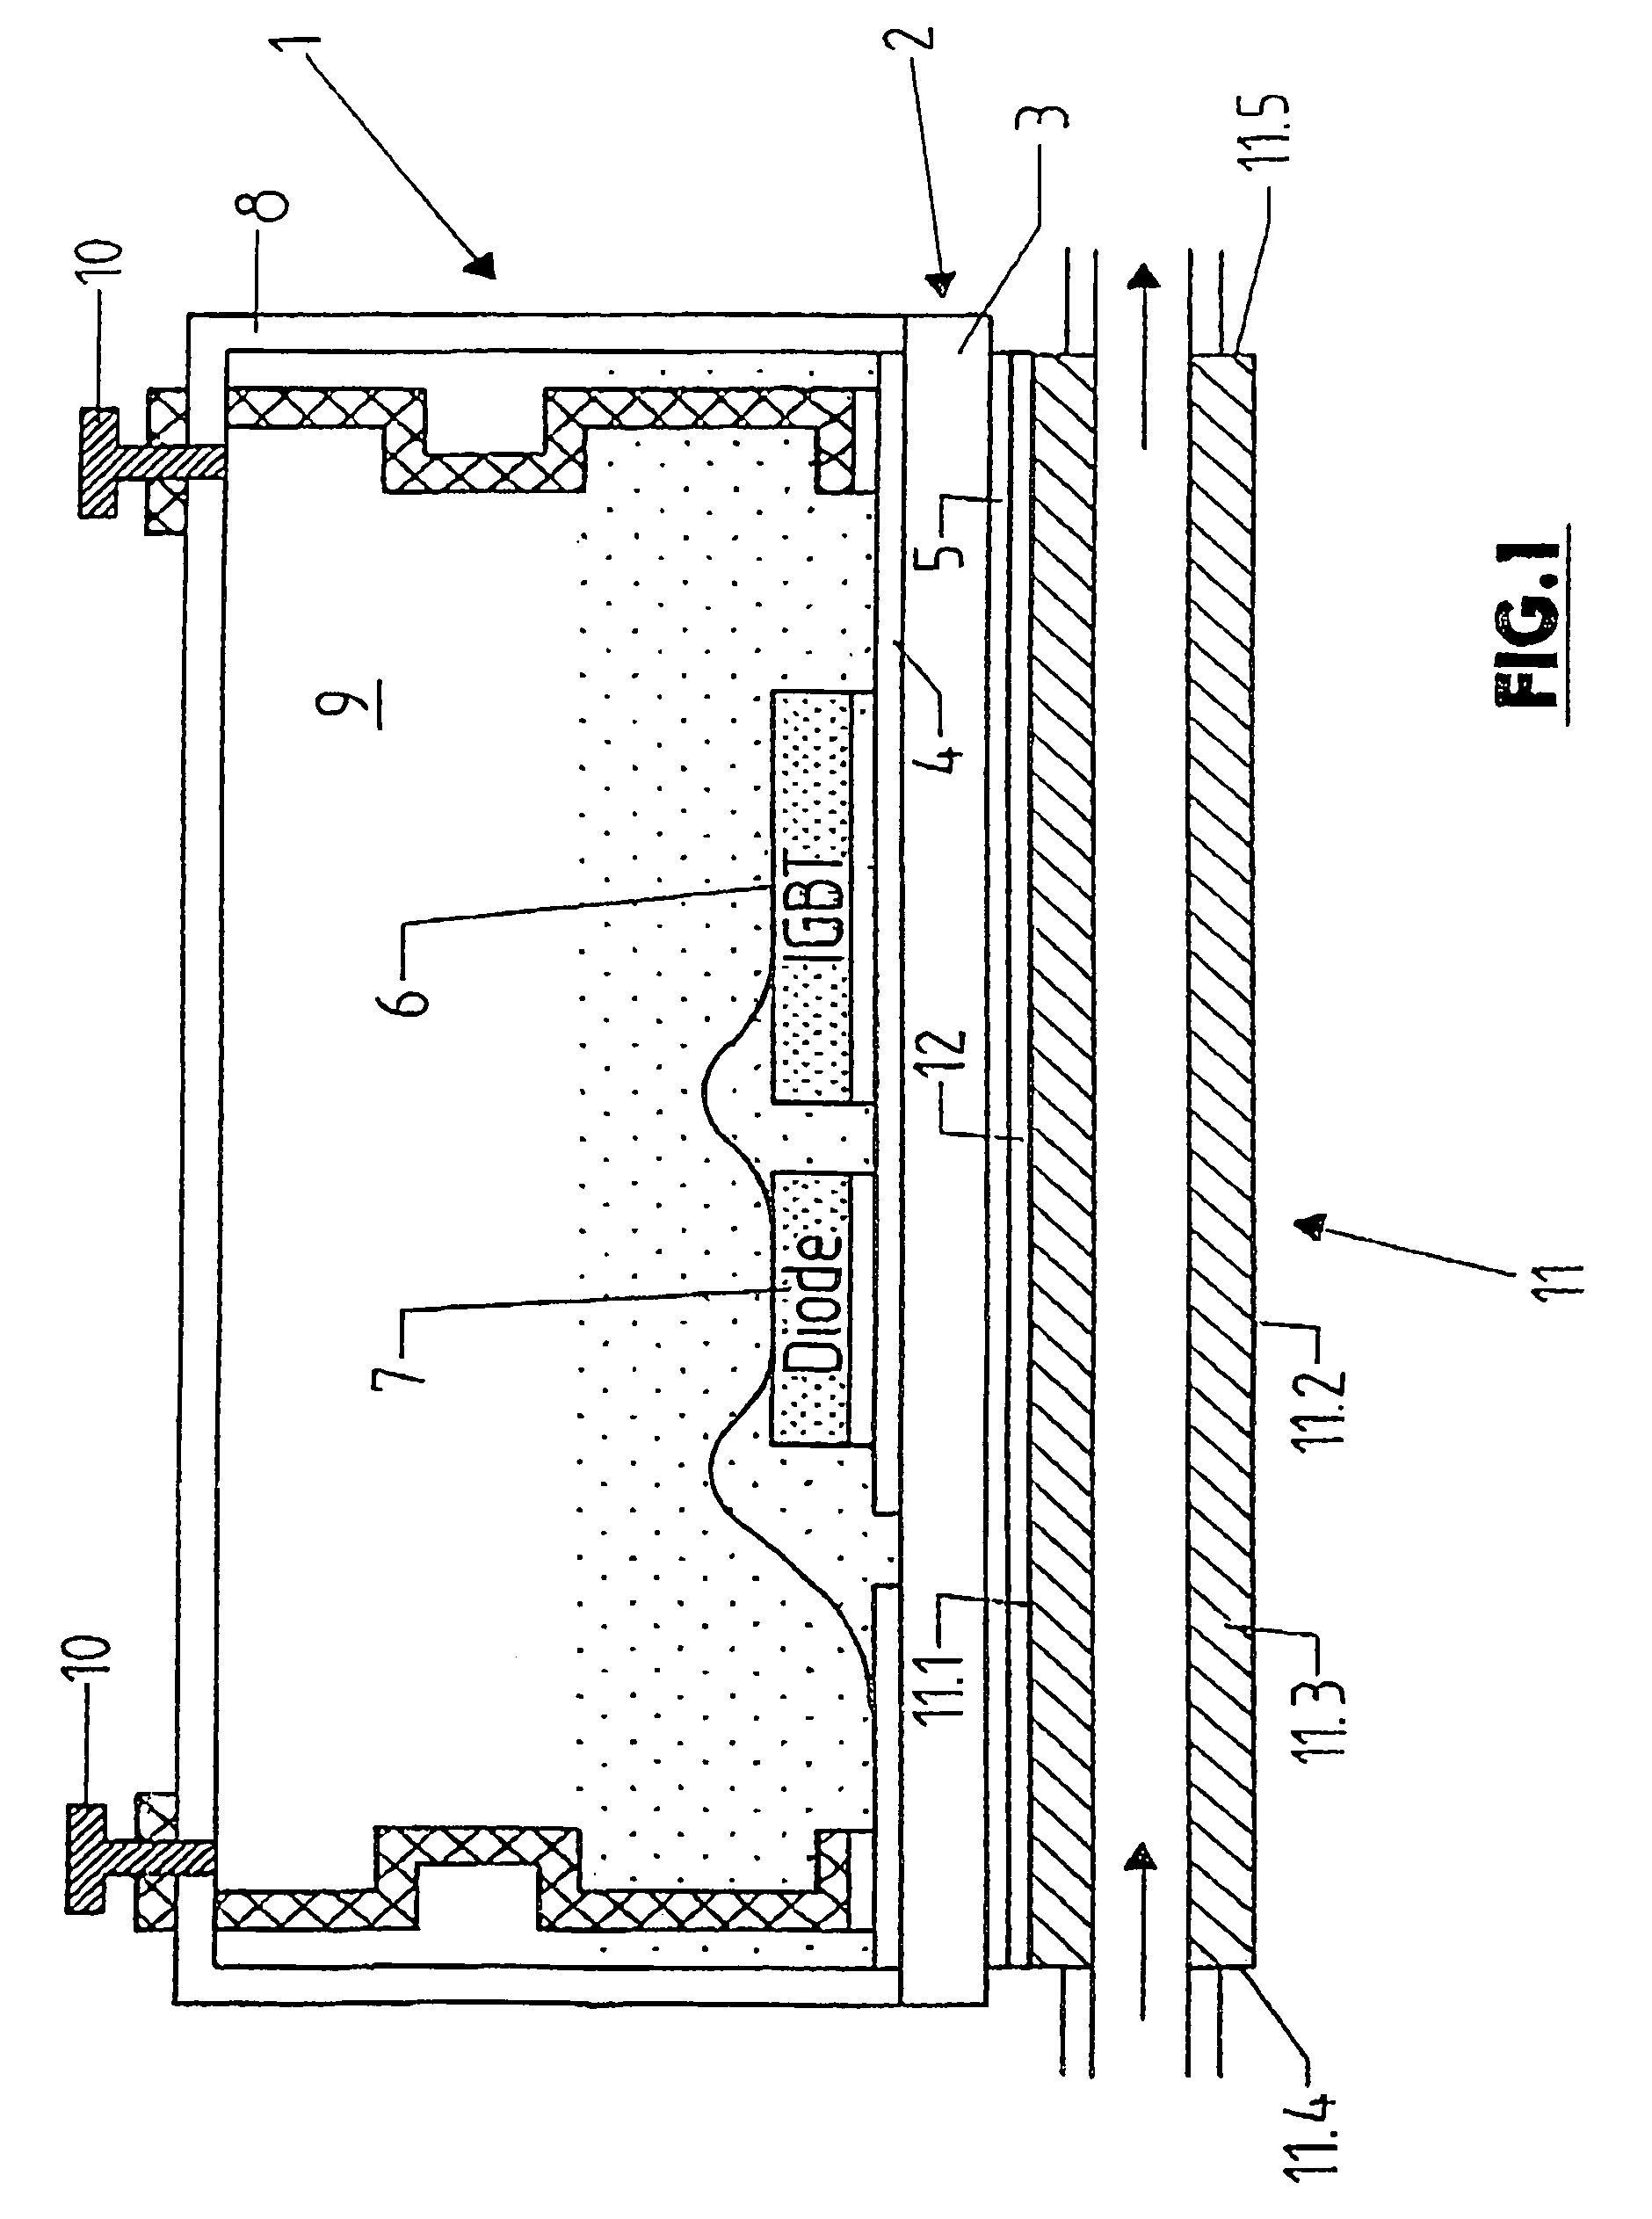 Heat sink and assembly or module unit